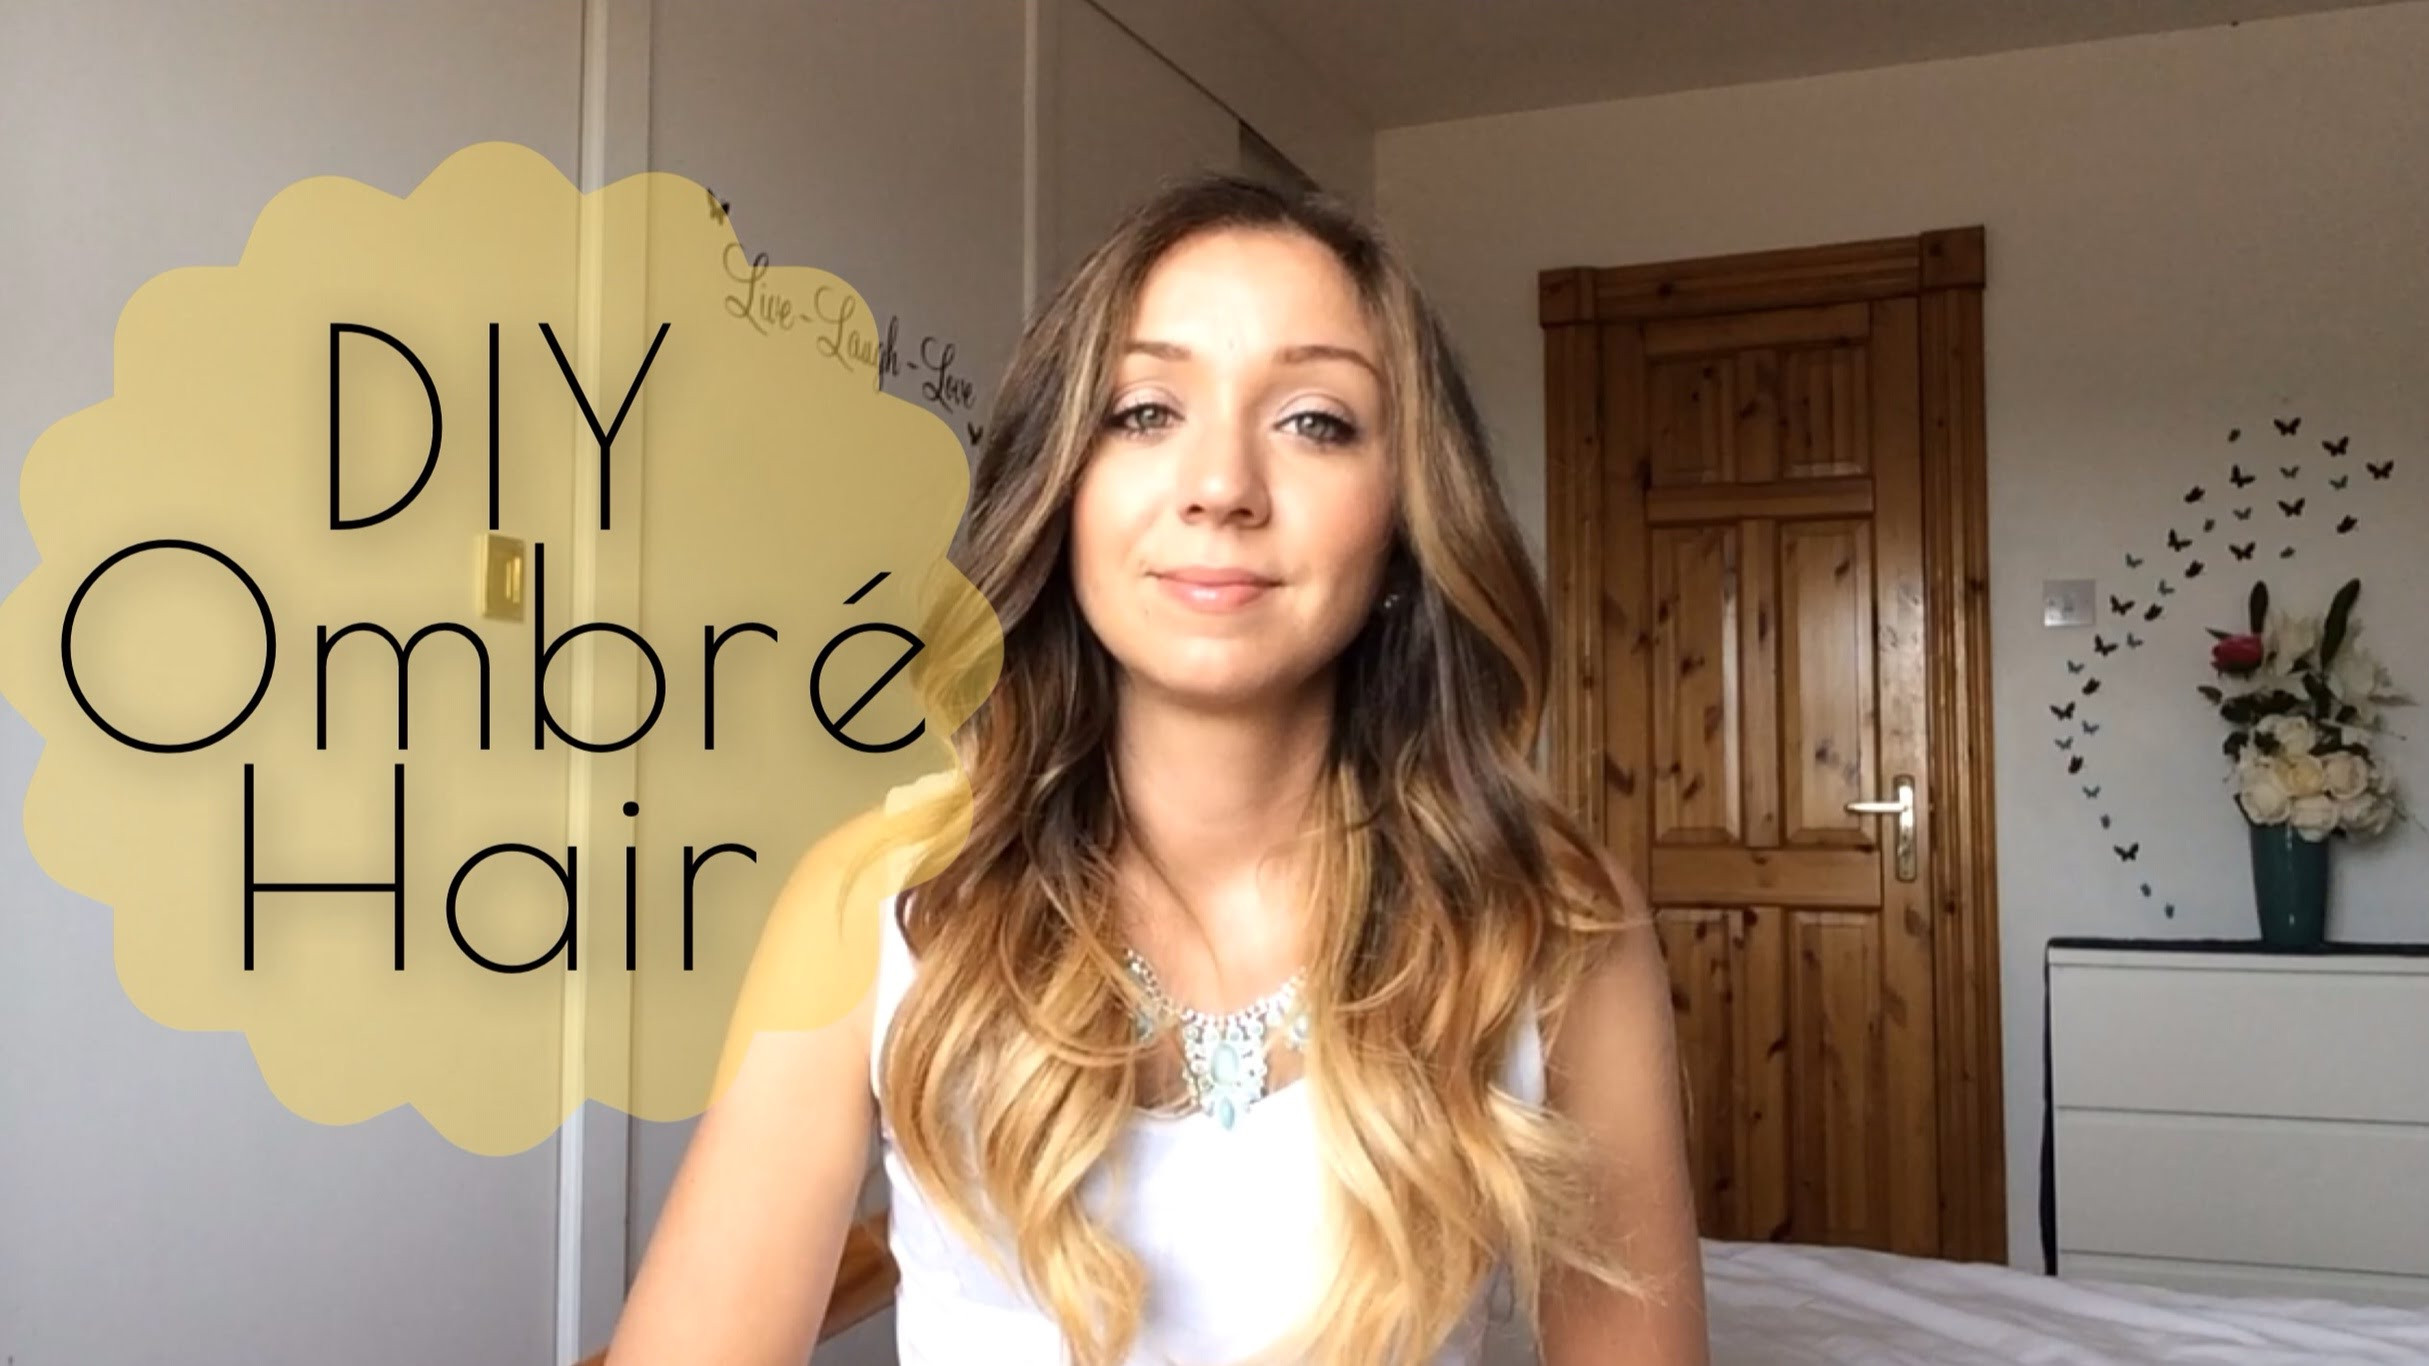 Short Ombre Hair DIY
 Balayage vs Ombre Hair 20 Beautiful Styles